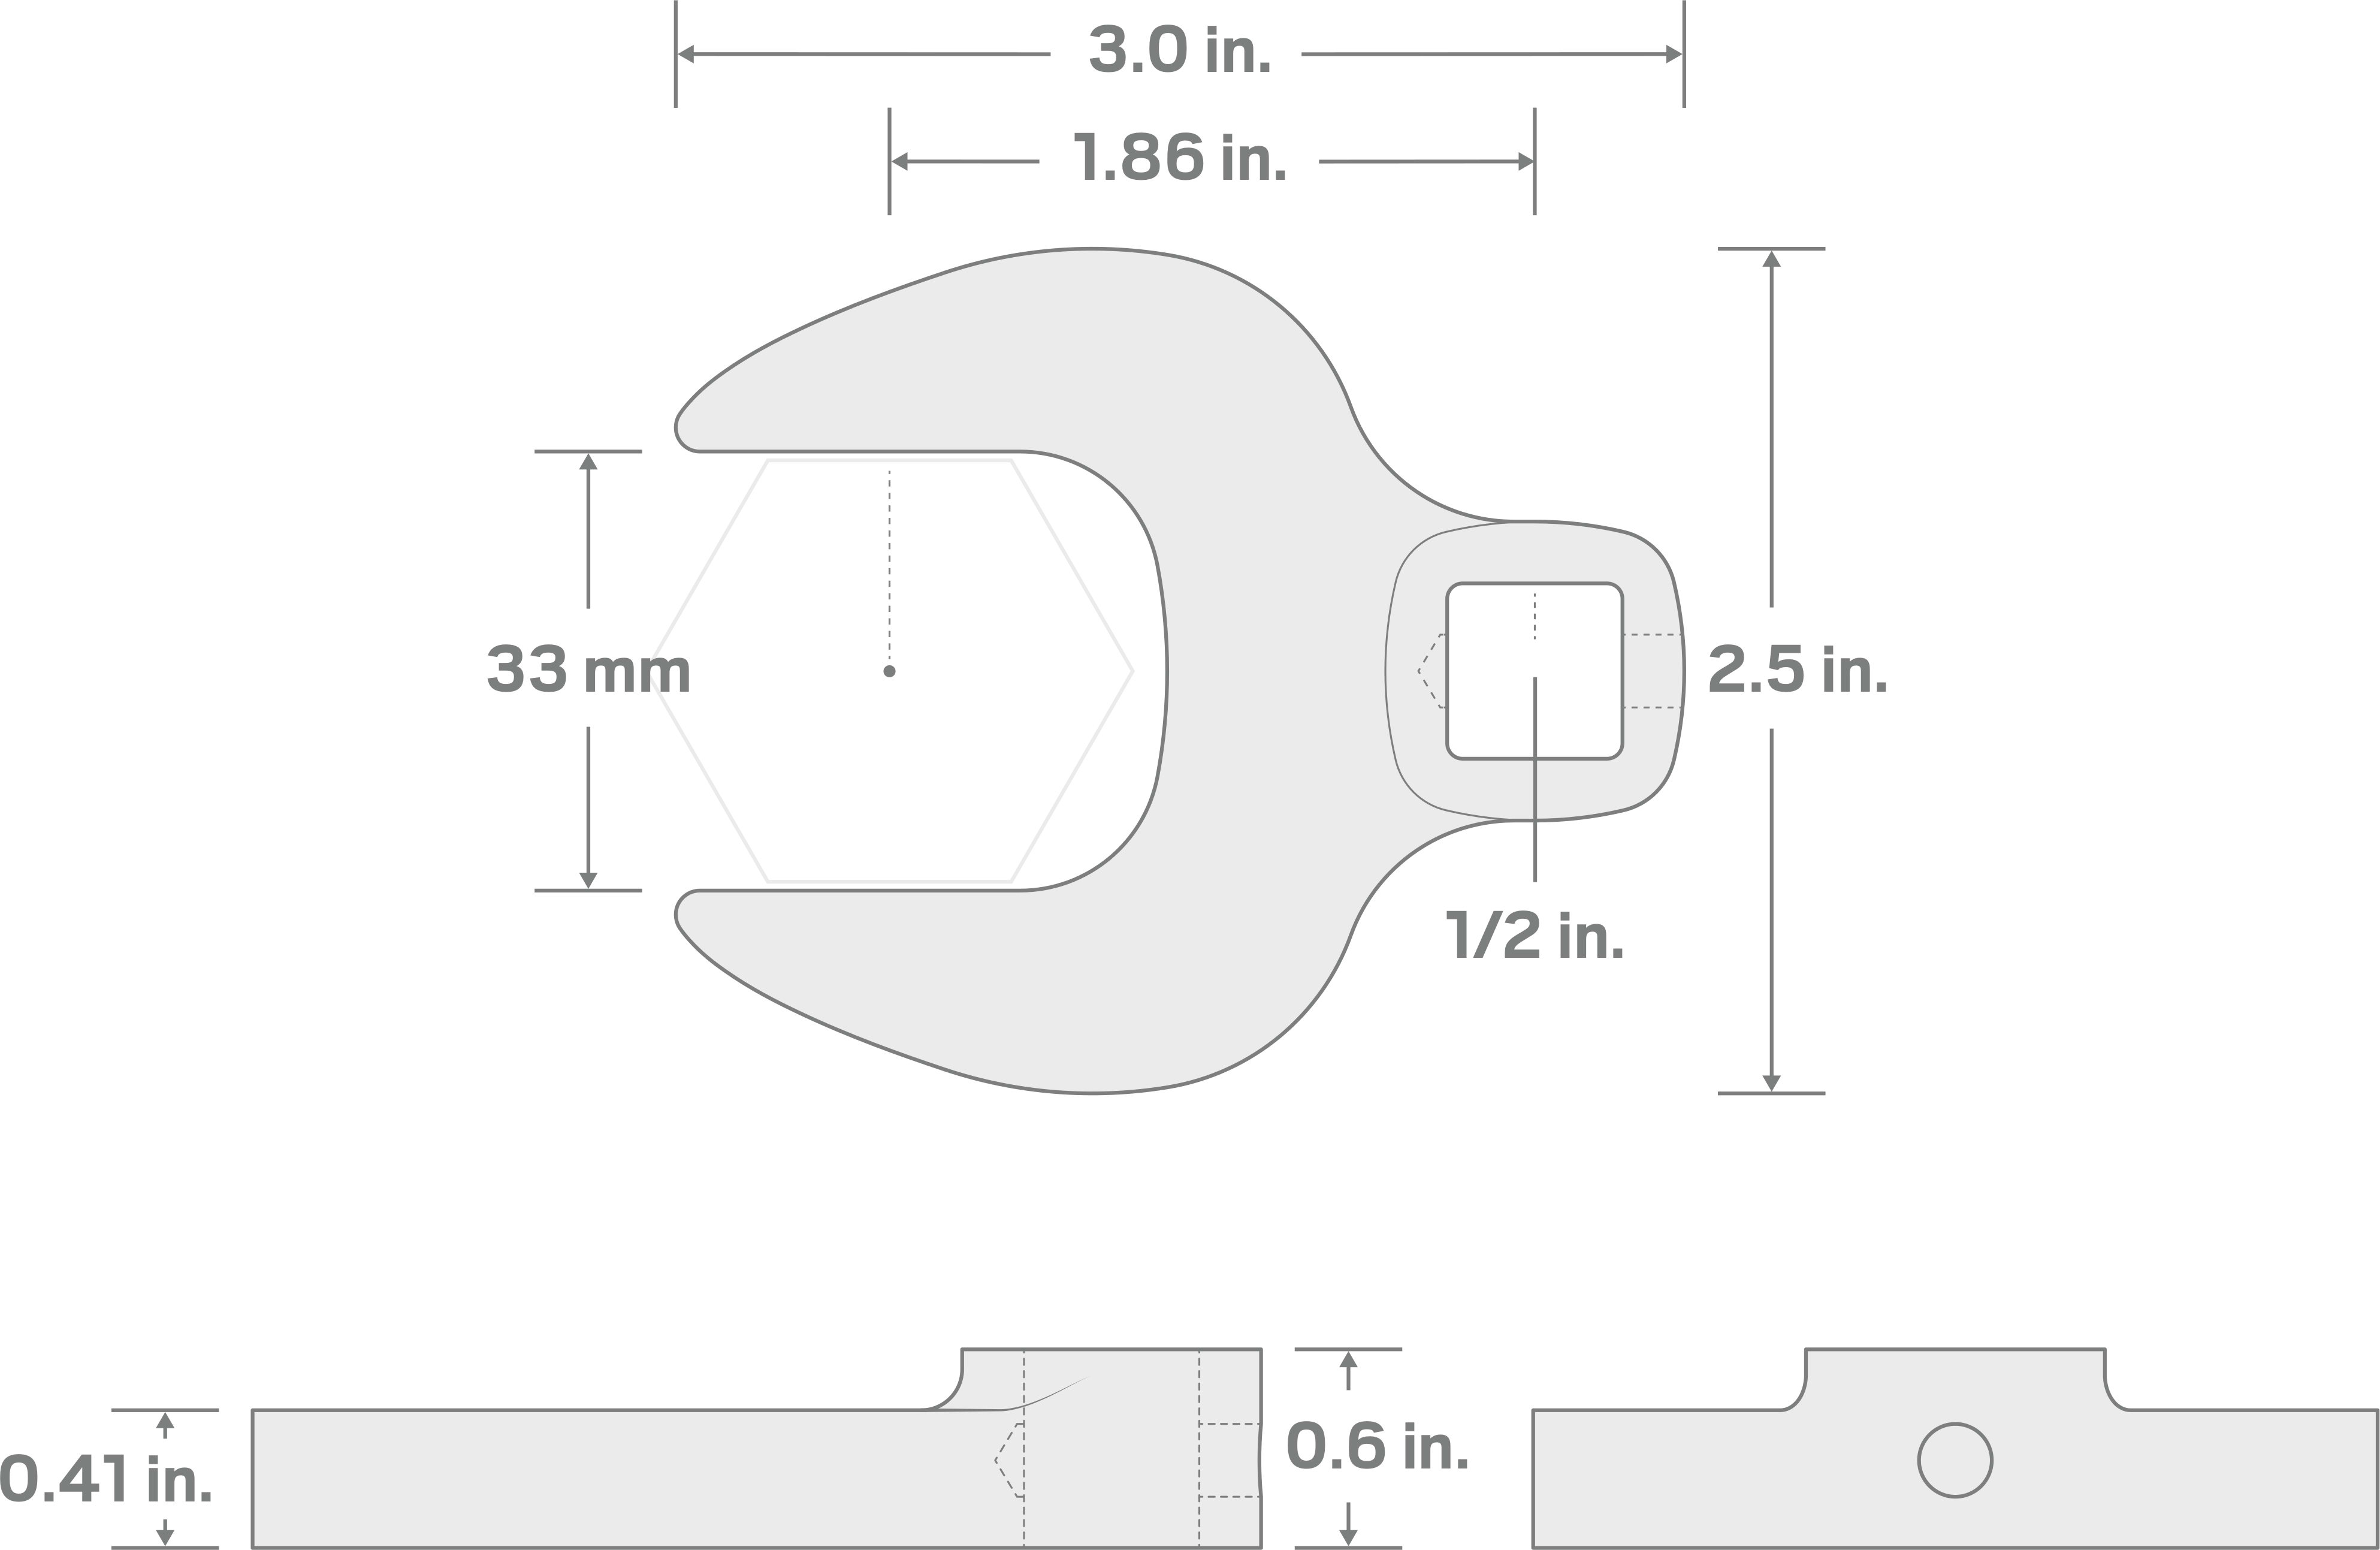 Specs for 1/2 Inch Drive x 33 mm Crowfoot Wrench